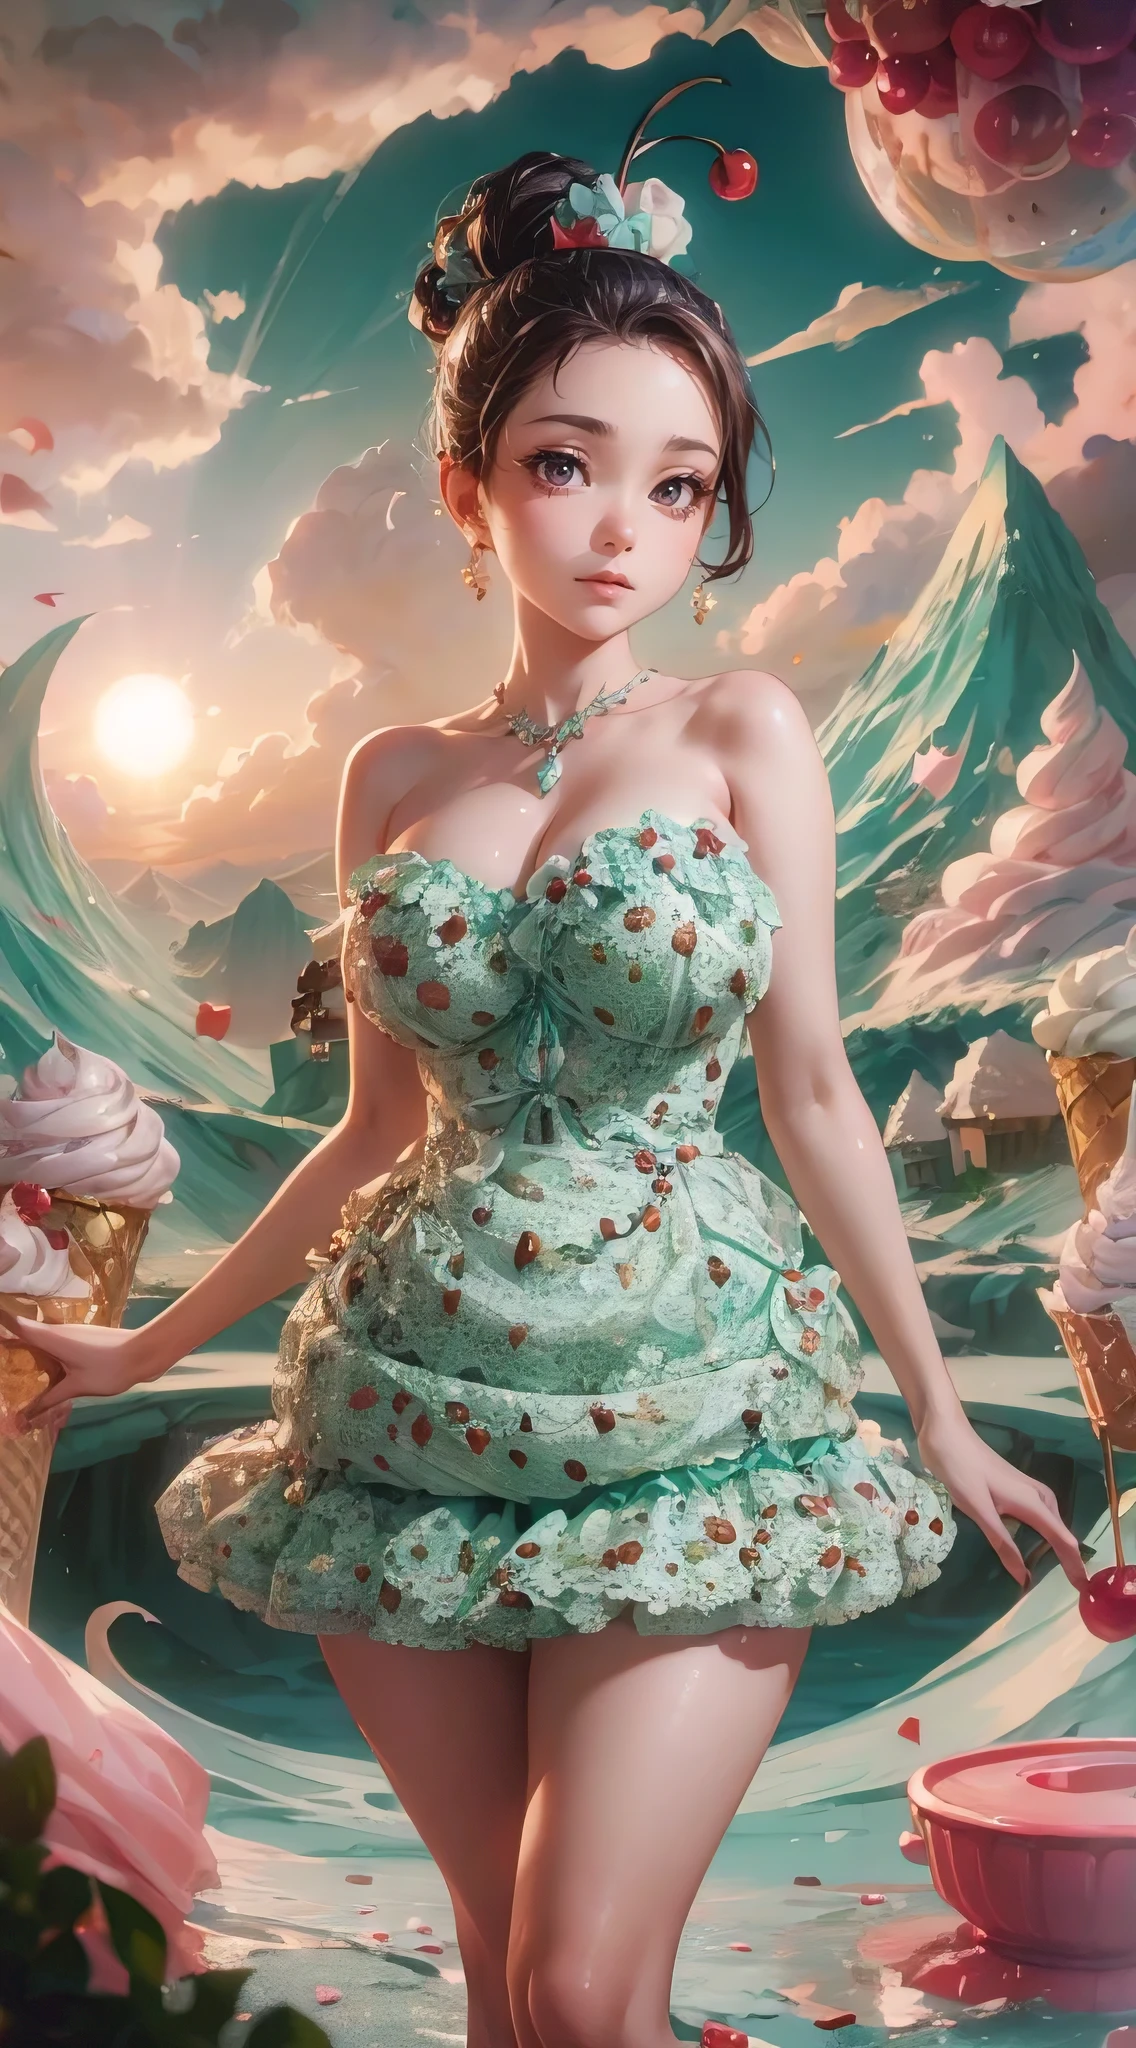 A stunningly realistic illustration of a voluptuous, slender, and attractive woman with big, gorgeous eyes and a soft smile. She wears a fashionable minidress made entirely of mint chocolate chip ice cream, standing in a whimsical Ice Cream Wonderland. The dress shimmers and glistens, adorned with cherry on top and a cherry ice cream cone accessory. The backdrop is a fantastical world of ice cream mountains, swirling clouds, and a sun setting over a beautiful landscape. This 3D render art piece captures the essence of anime with its vibrant colors and unique fashion statement., anime, illustration, 3d render, fashion